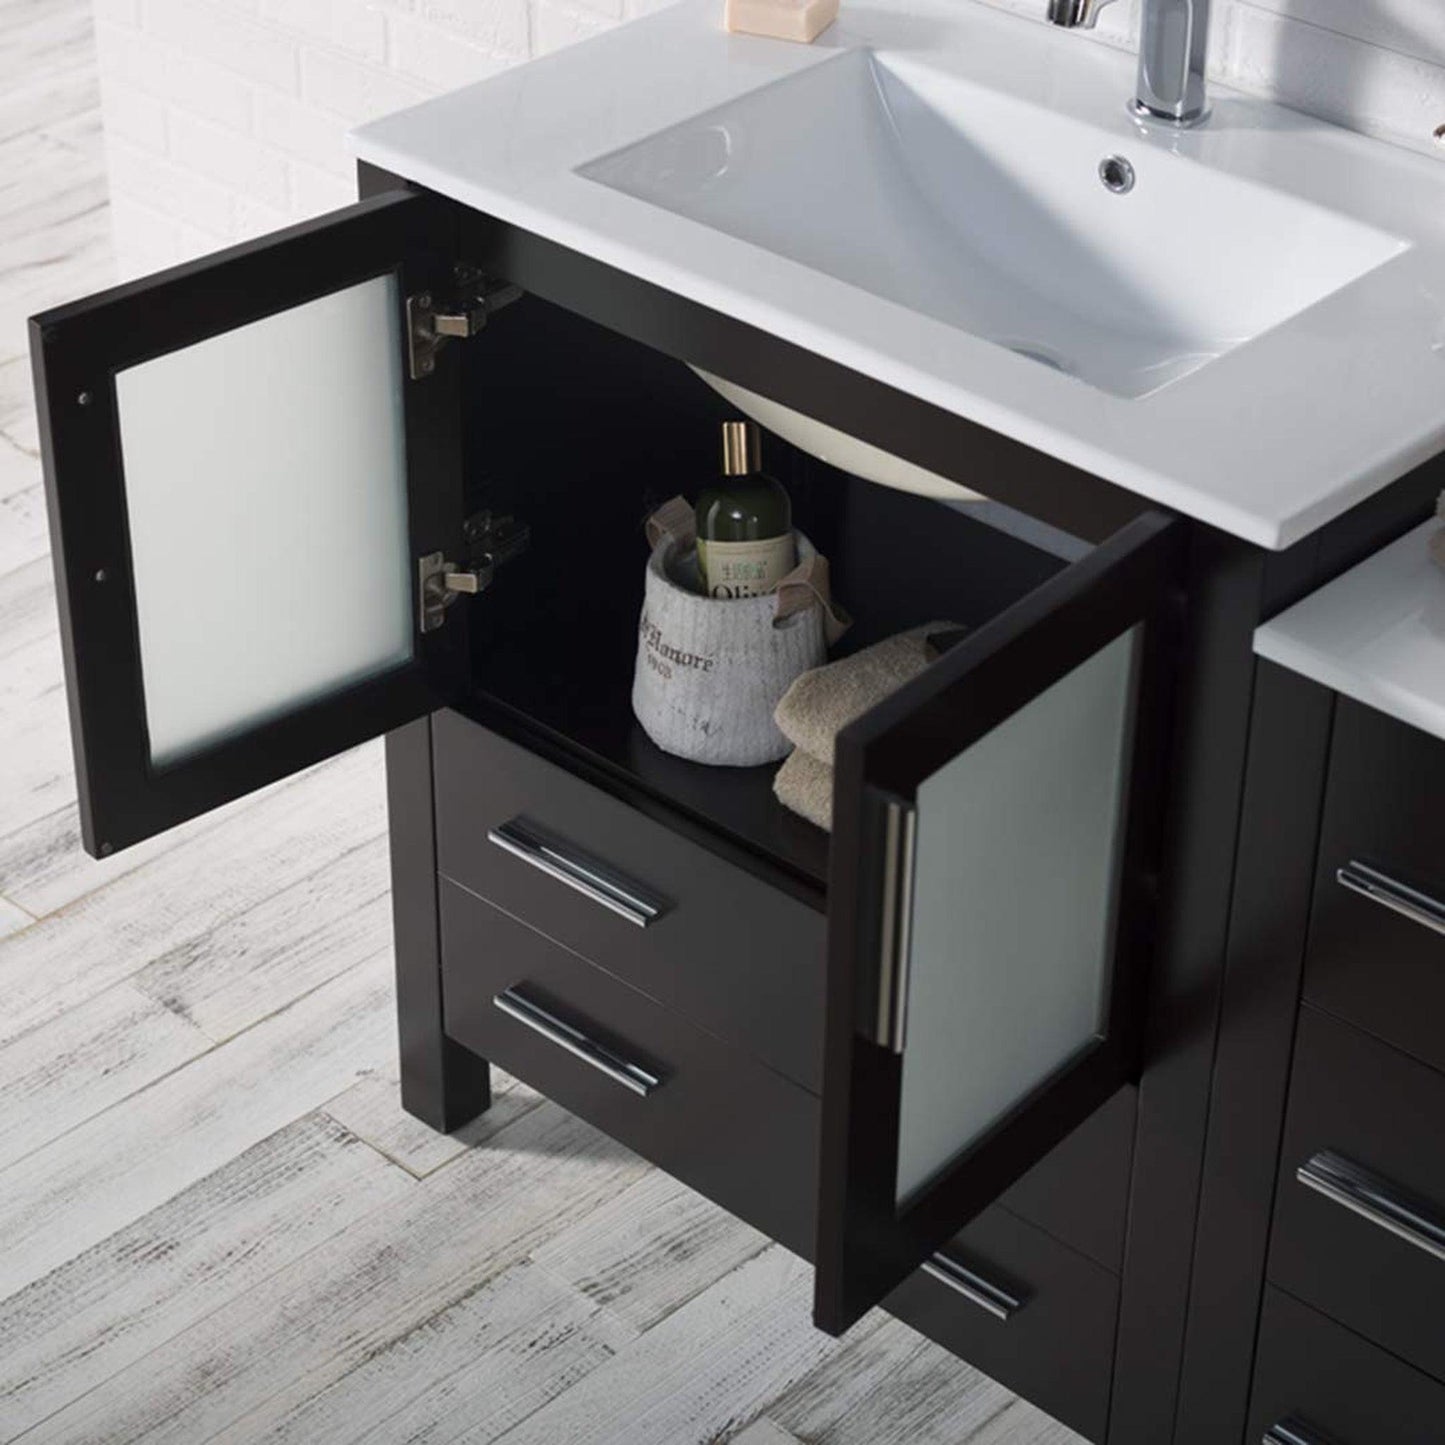 Blossom Sydney 42" Espresso Freestanding Vanity Set With Ceramic Top and Integrated Single Sink, Mirror and Side Cabinet